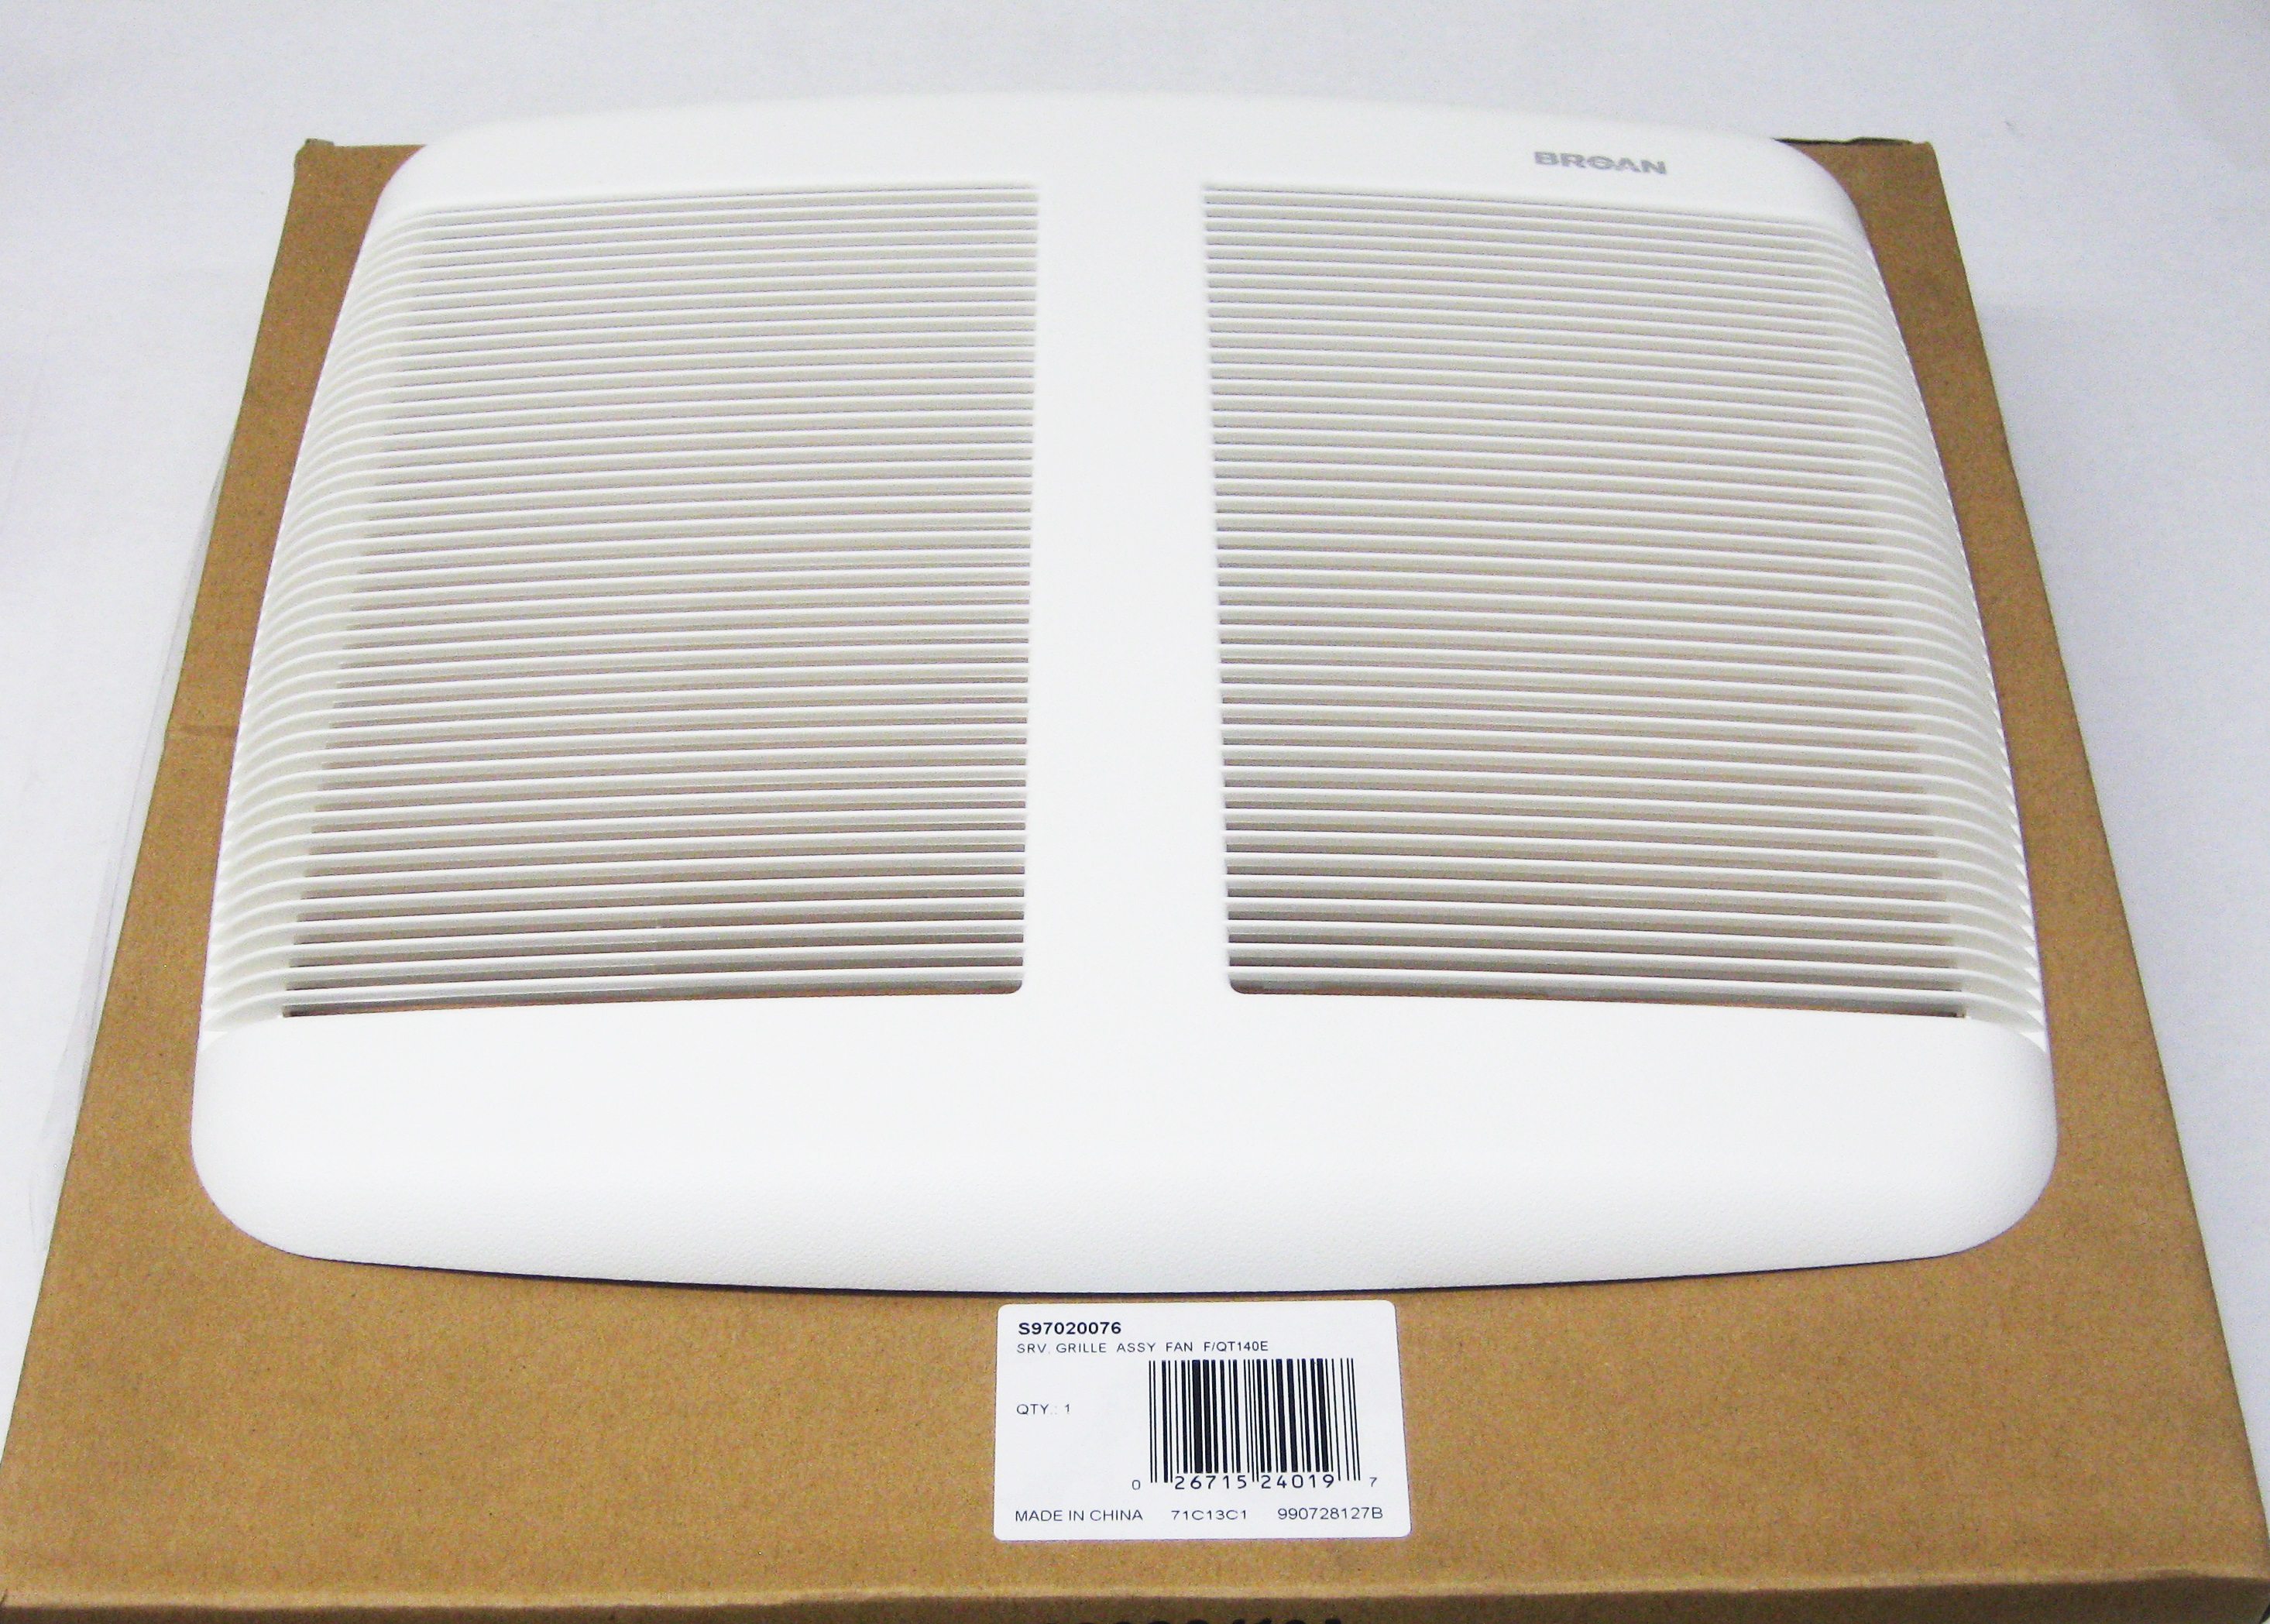 Broan Nutone S97020076 Vent Fan Grill Cover Assembly 26715240197 | eBay